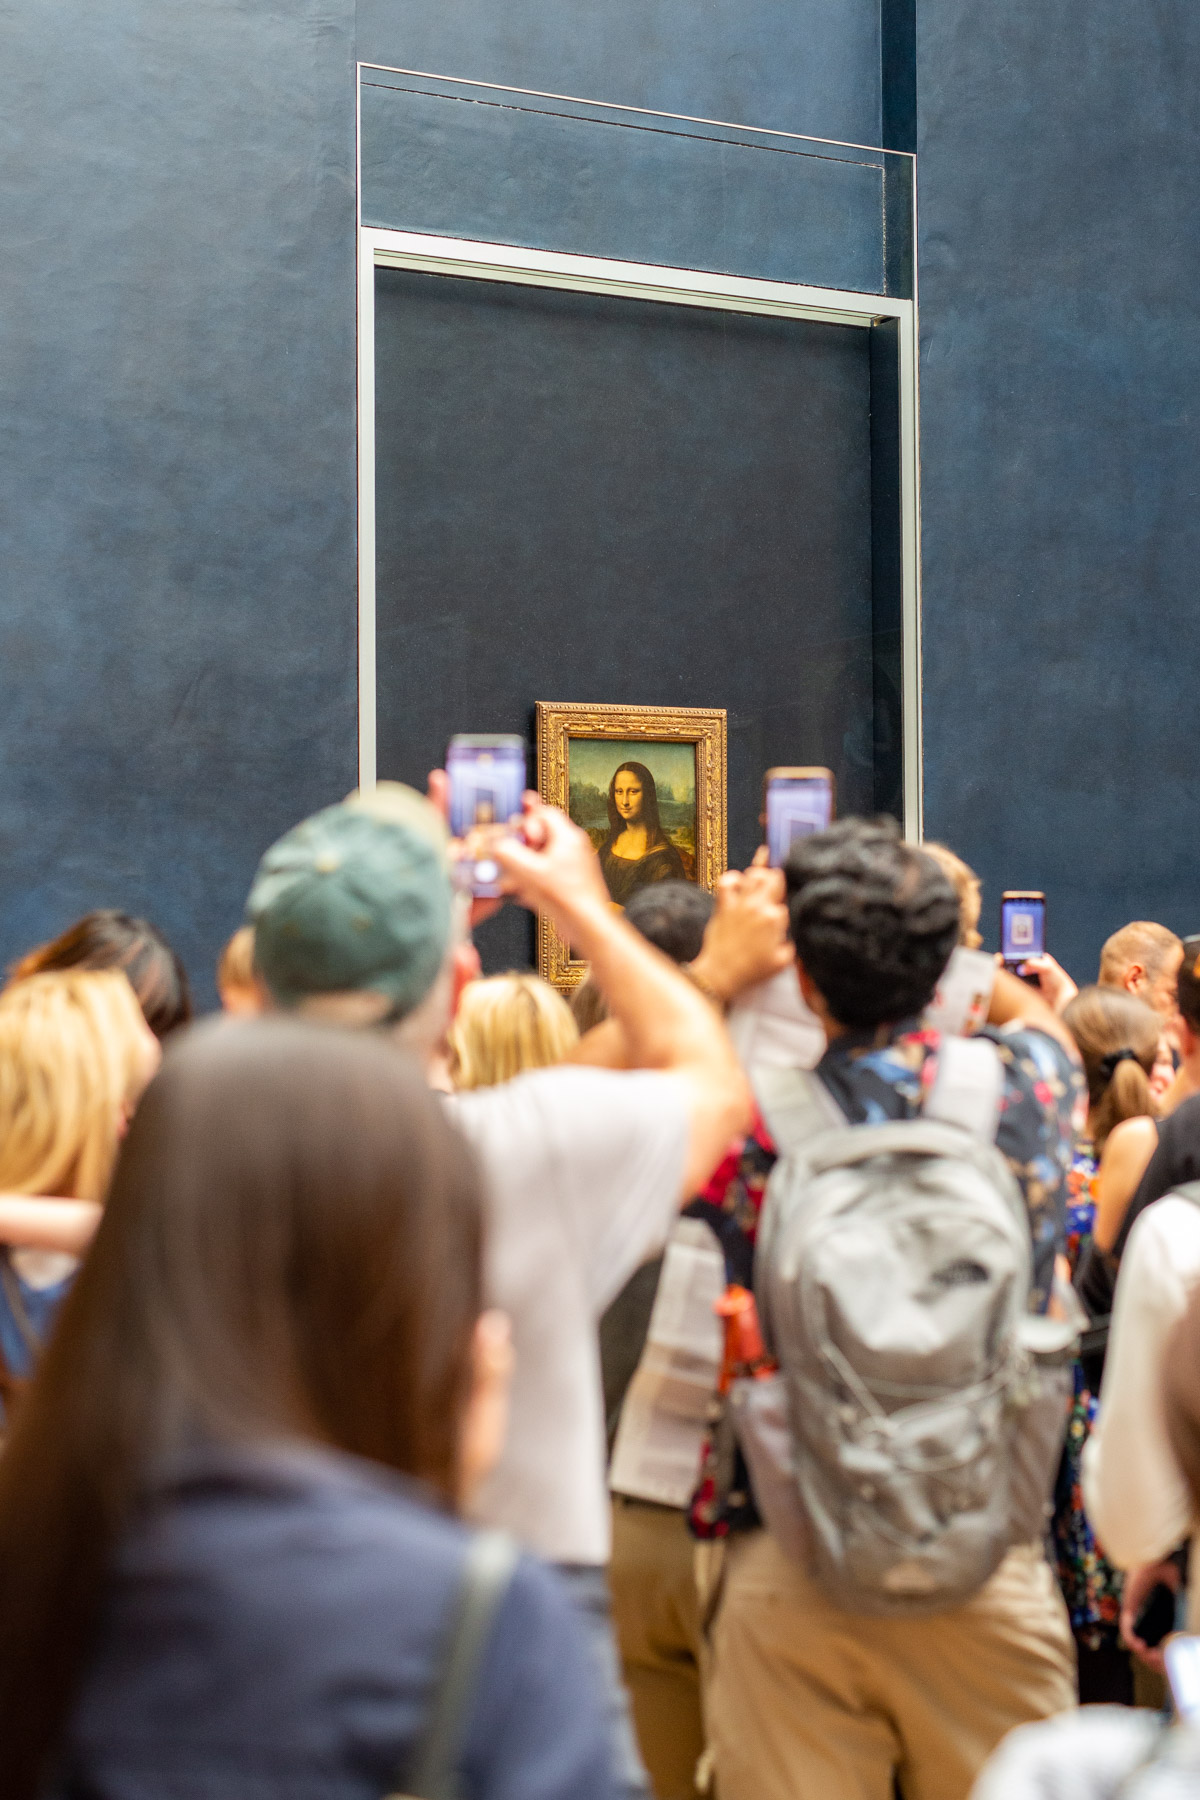 Crowds of people taking photos of The Mona Lisa, Best things to see at The Louvre